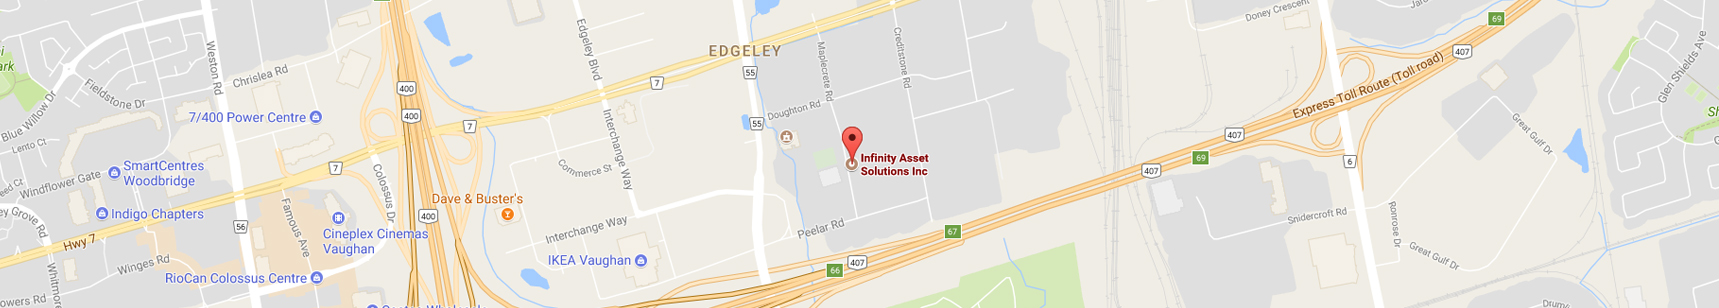 Infinity Asset Solutions Inc. Location